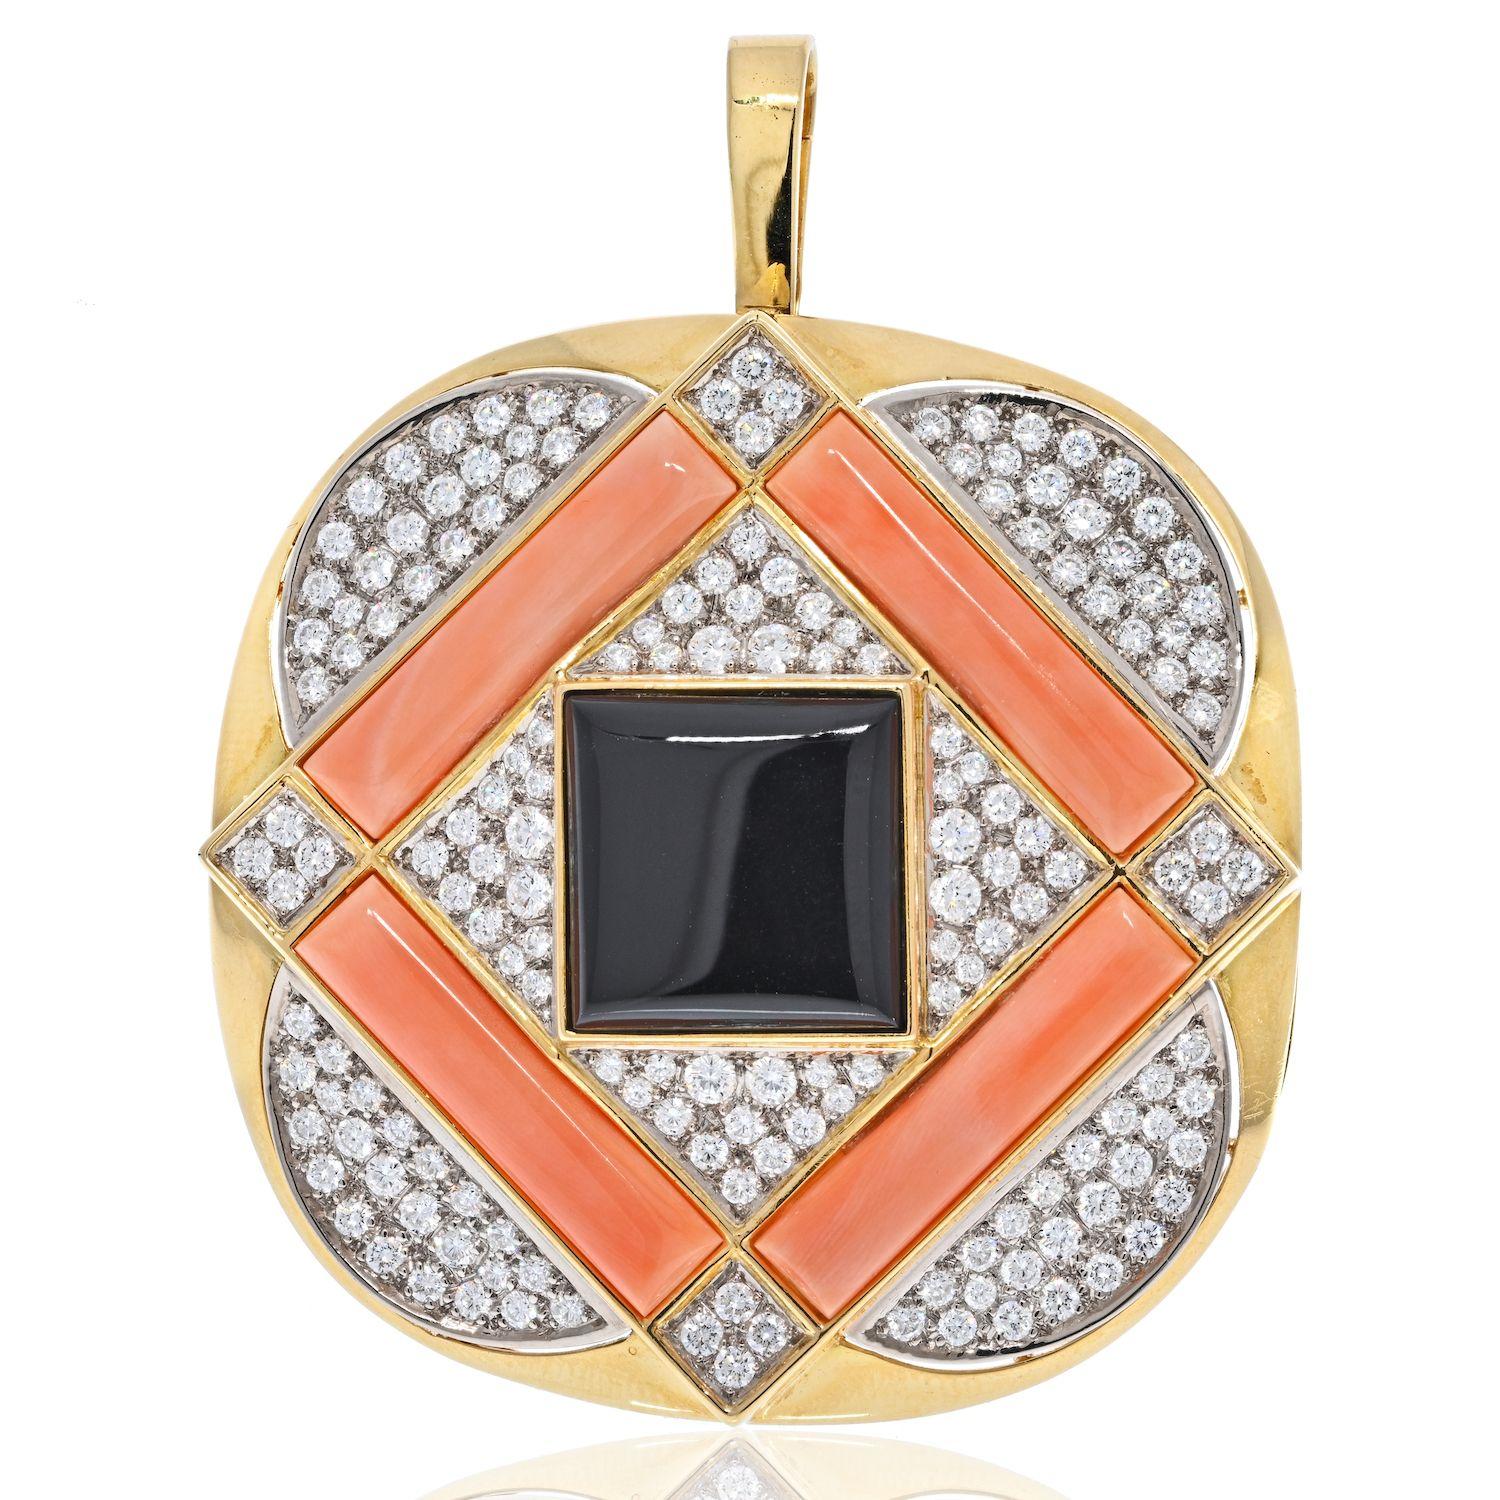 Vacheron Constantin 18K Yellow Gold 1970's Coral, Diamond And Onyx Pendant Brooch In Excellent Condition For Sale In New York, NY